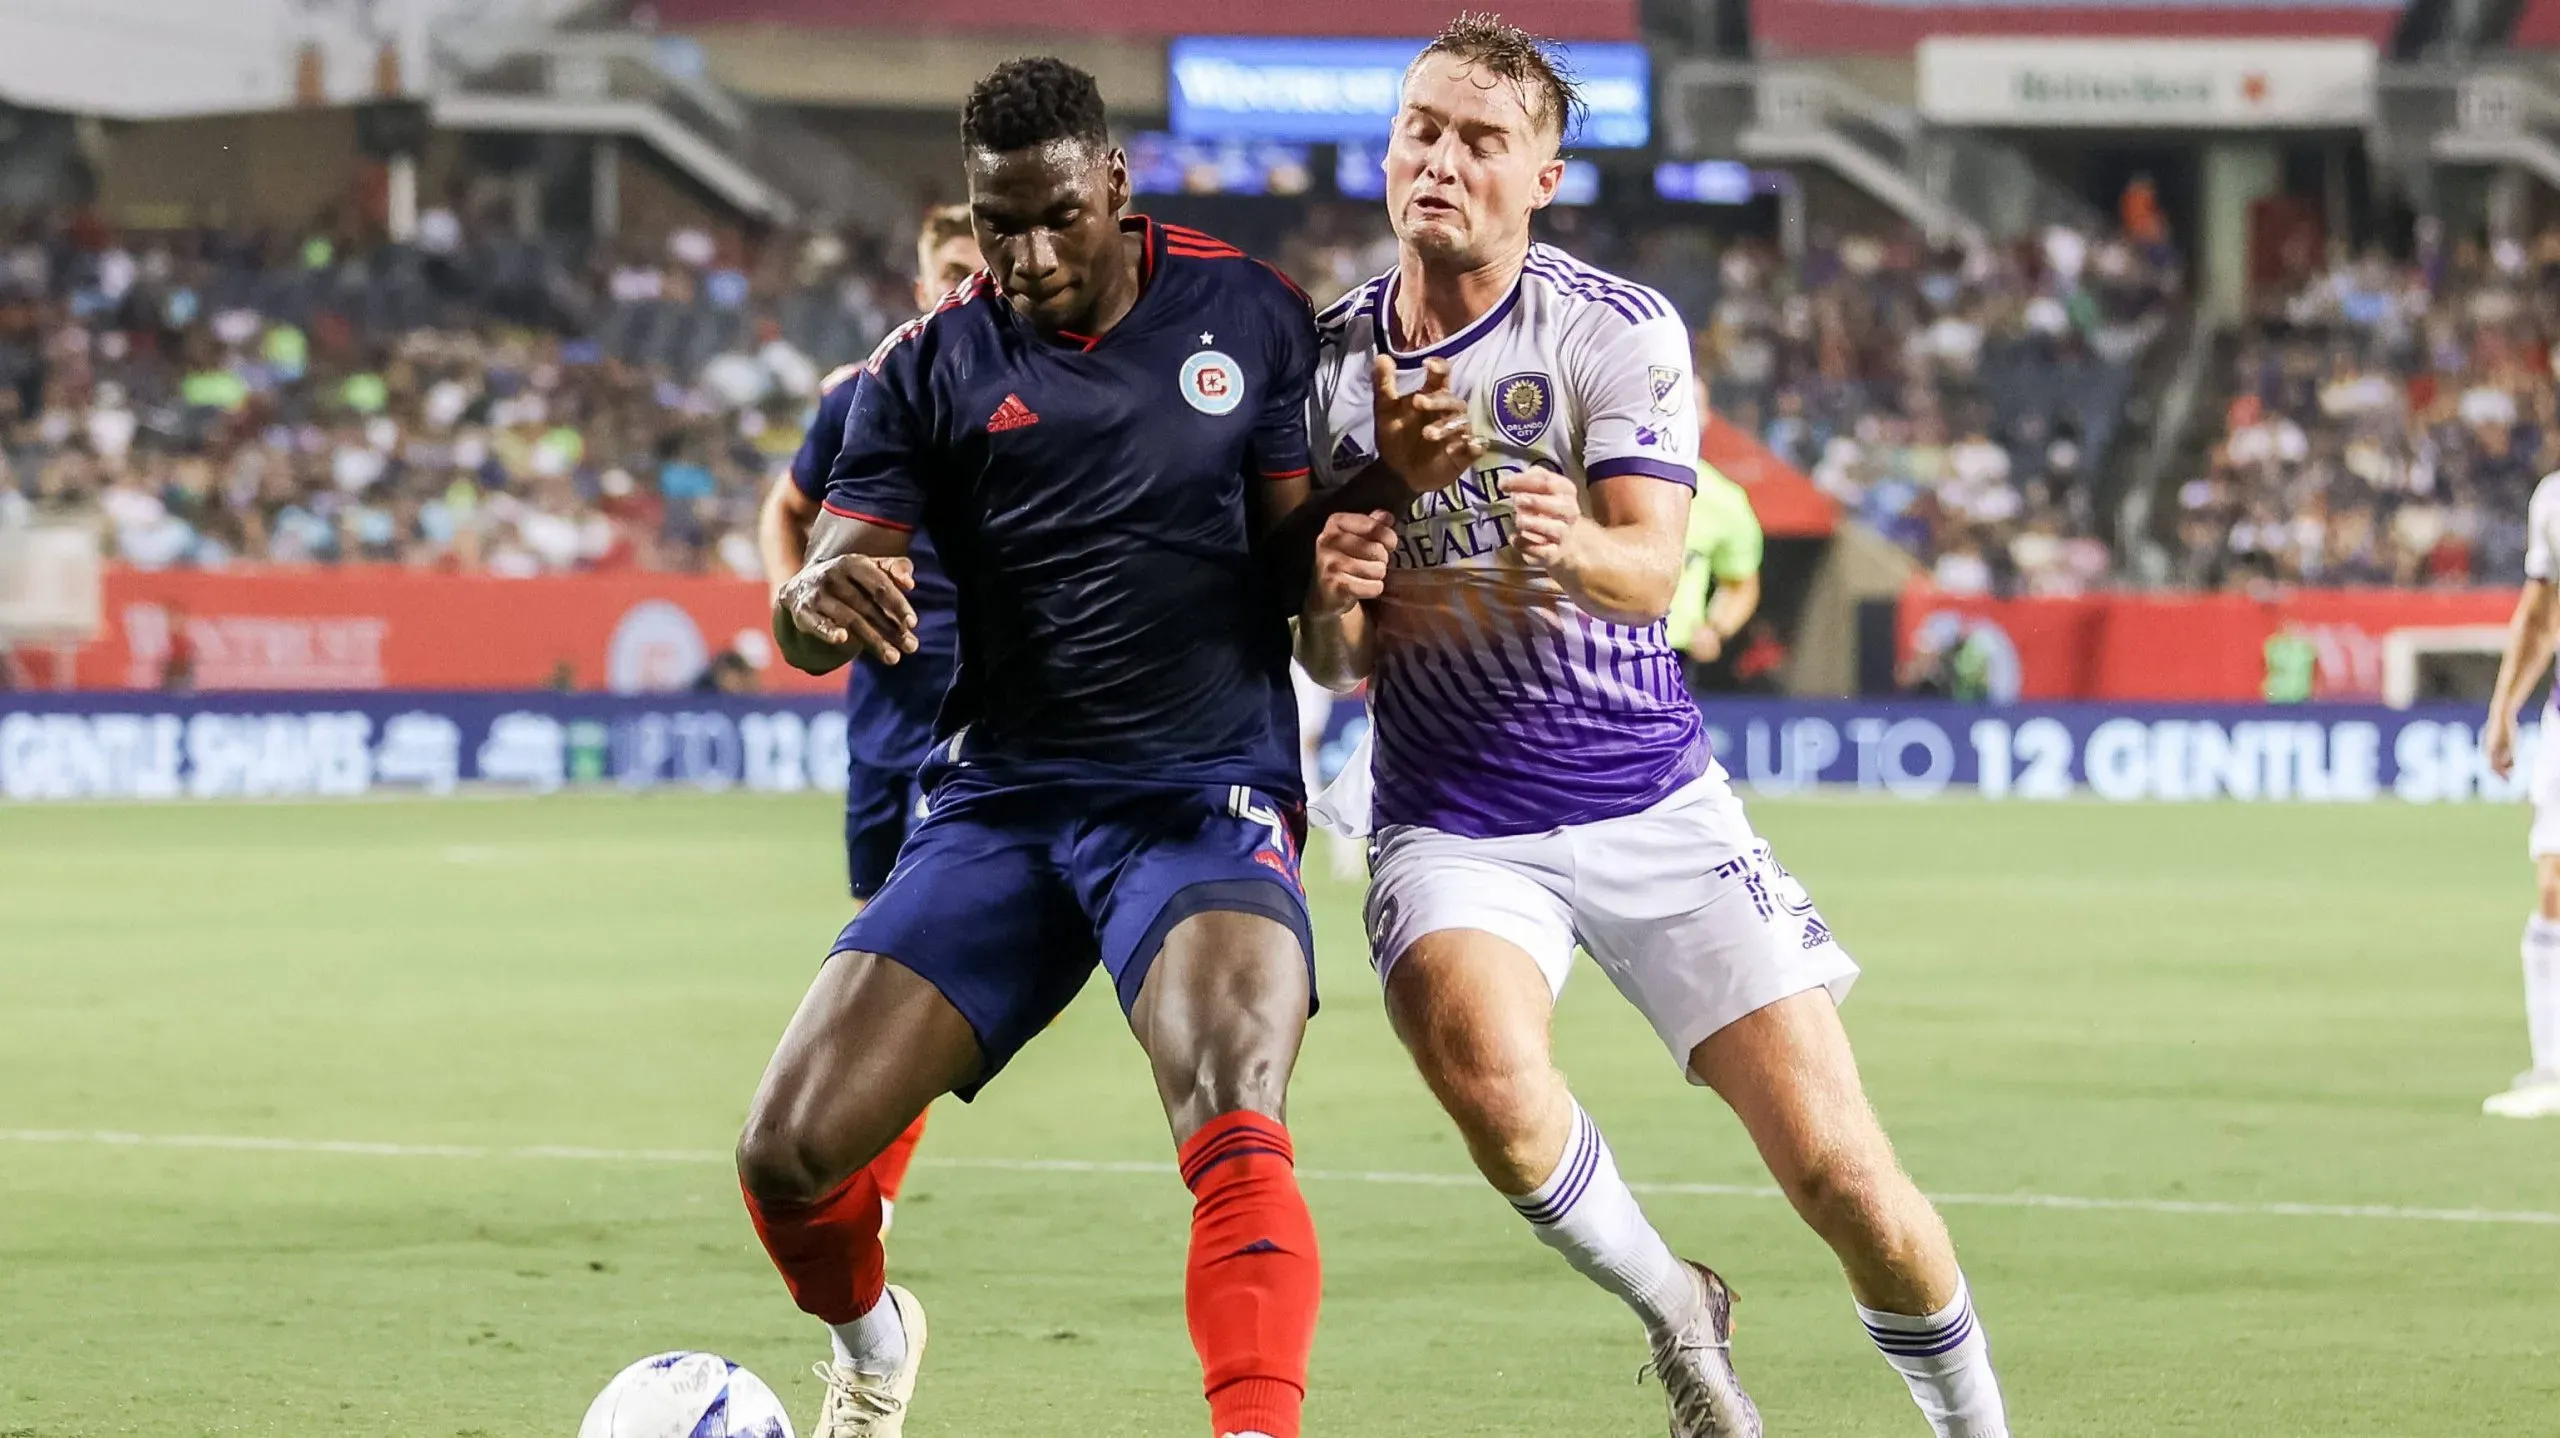 Chicago, USA, August 20, 2023: Duncan McGuire 13 Orlando City SC fouls Carlos Teran 4 Chicago Fire FC during the game between Chicago Fire FC and Orlando City SC on Sunday August 20, 2023 at Soldier Field, Chicago, USA. NO COMMERCIAL USAGE Shaina Benhiyoun/SPP PUBLICATIONxNOTxINxBRAxMEX Copyright: xShainaxBenhiyoun/SPPx spp-en-ShBe-590A1289